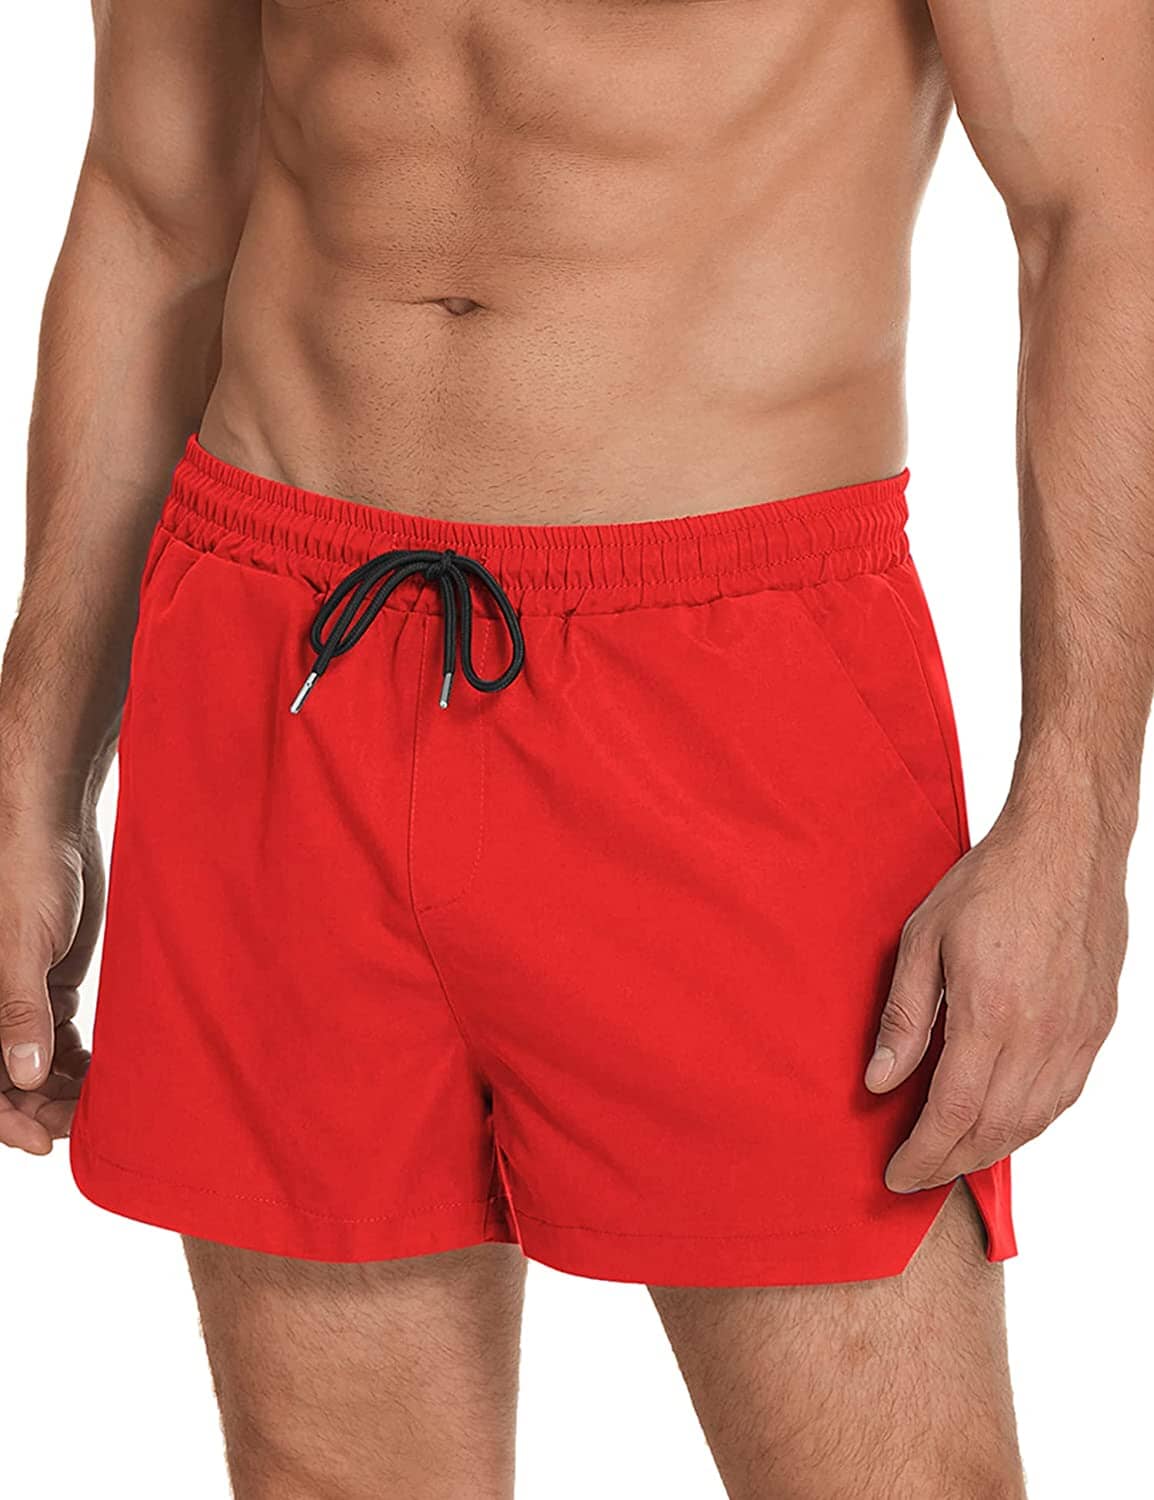 Classic Quick Dry Sport Shorts (US Only) Shorts COOFANDY Store Orange Red S 